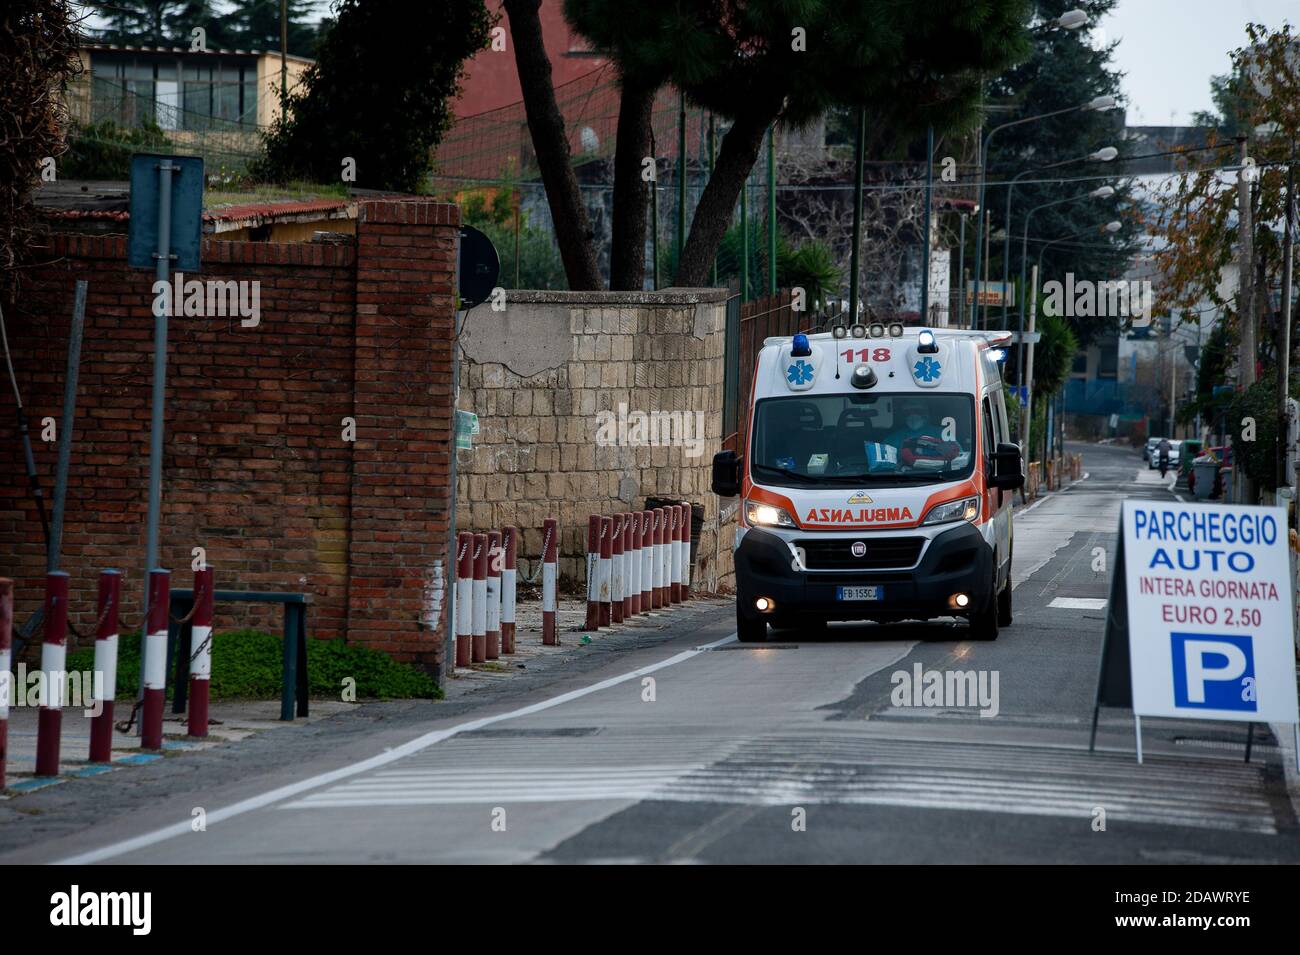 An ambulance carrying a covid19 suspected patient arrives at Cotugno Hospital.With the high spread of Covid-19 pandemic in Campania region, assistance for suspected cases of covid 19 at the hospitals in Naples occur at the parking areas with checking and oxygen supply. Stock Photo